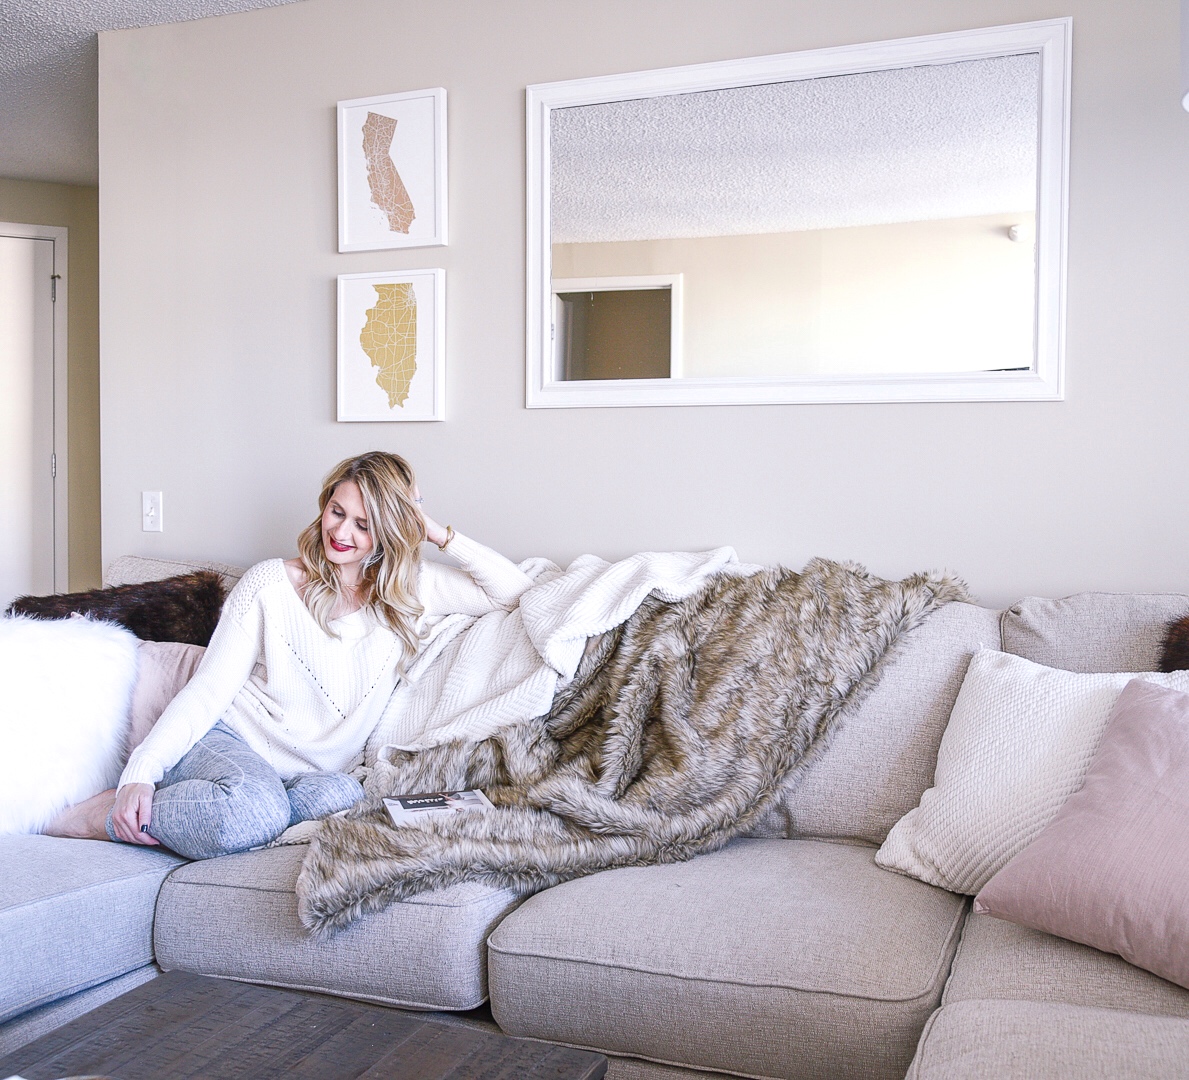 At home with fashion blogger Jenna Colgrove on her Ashley Home Wilcot couch.